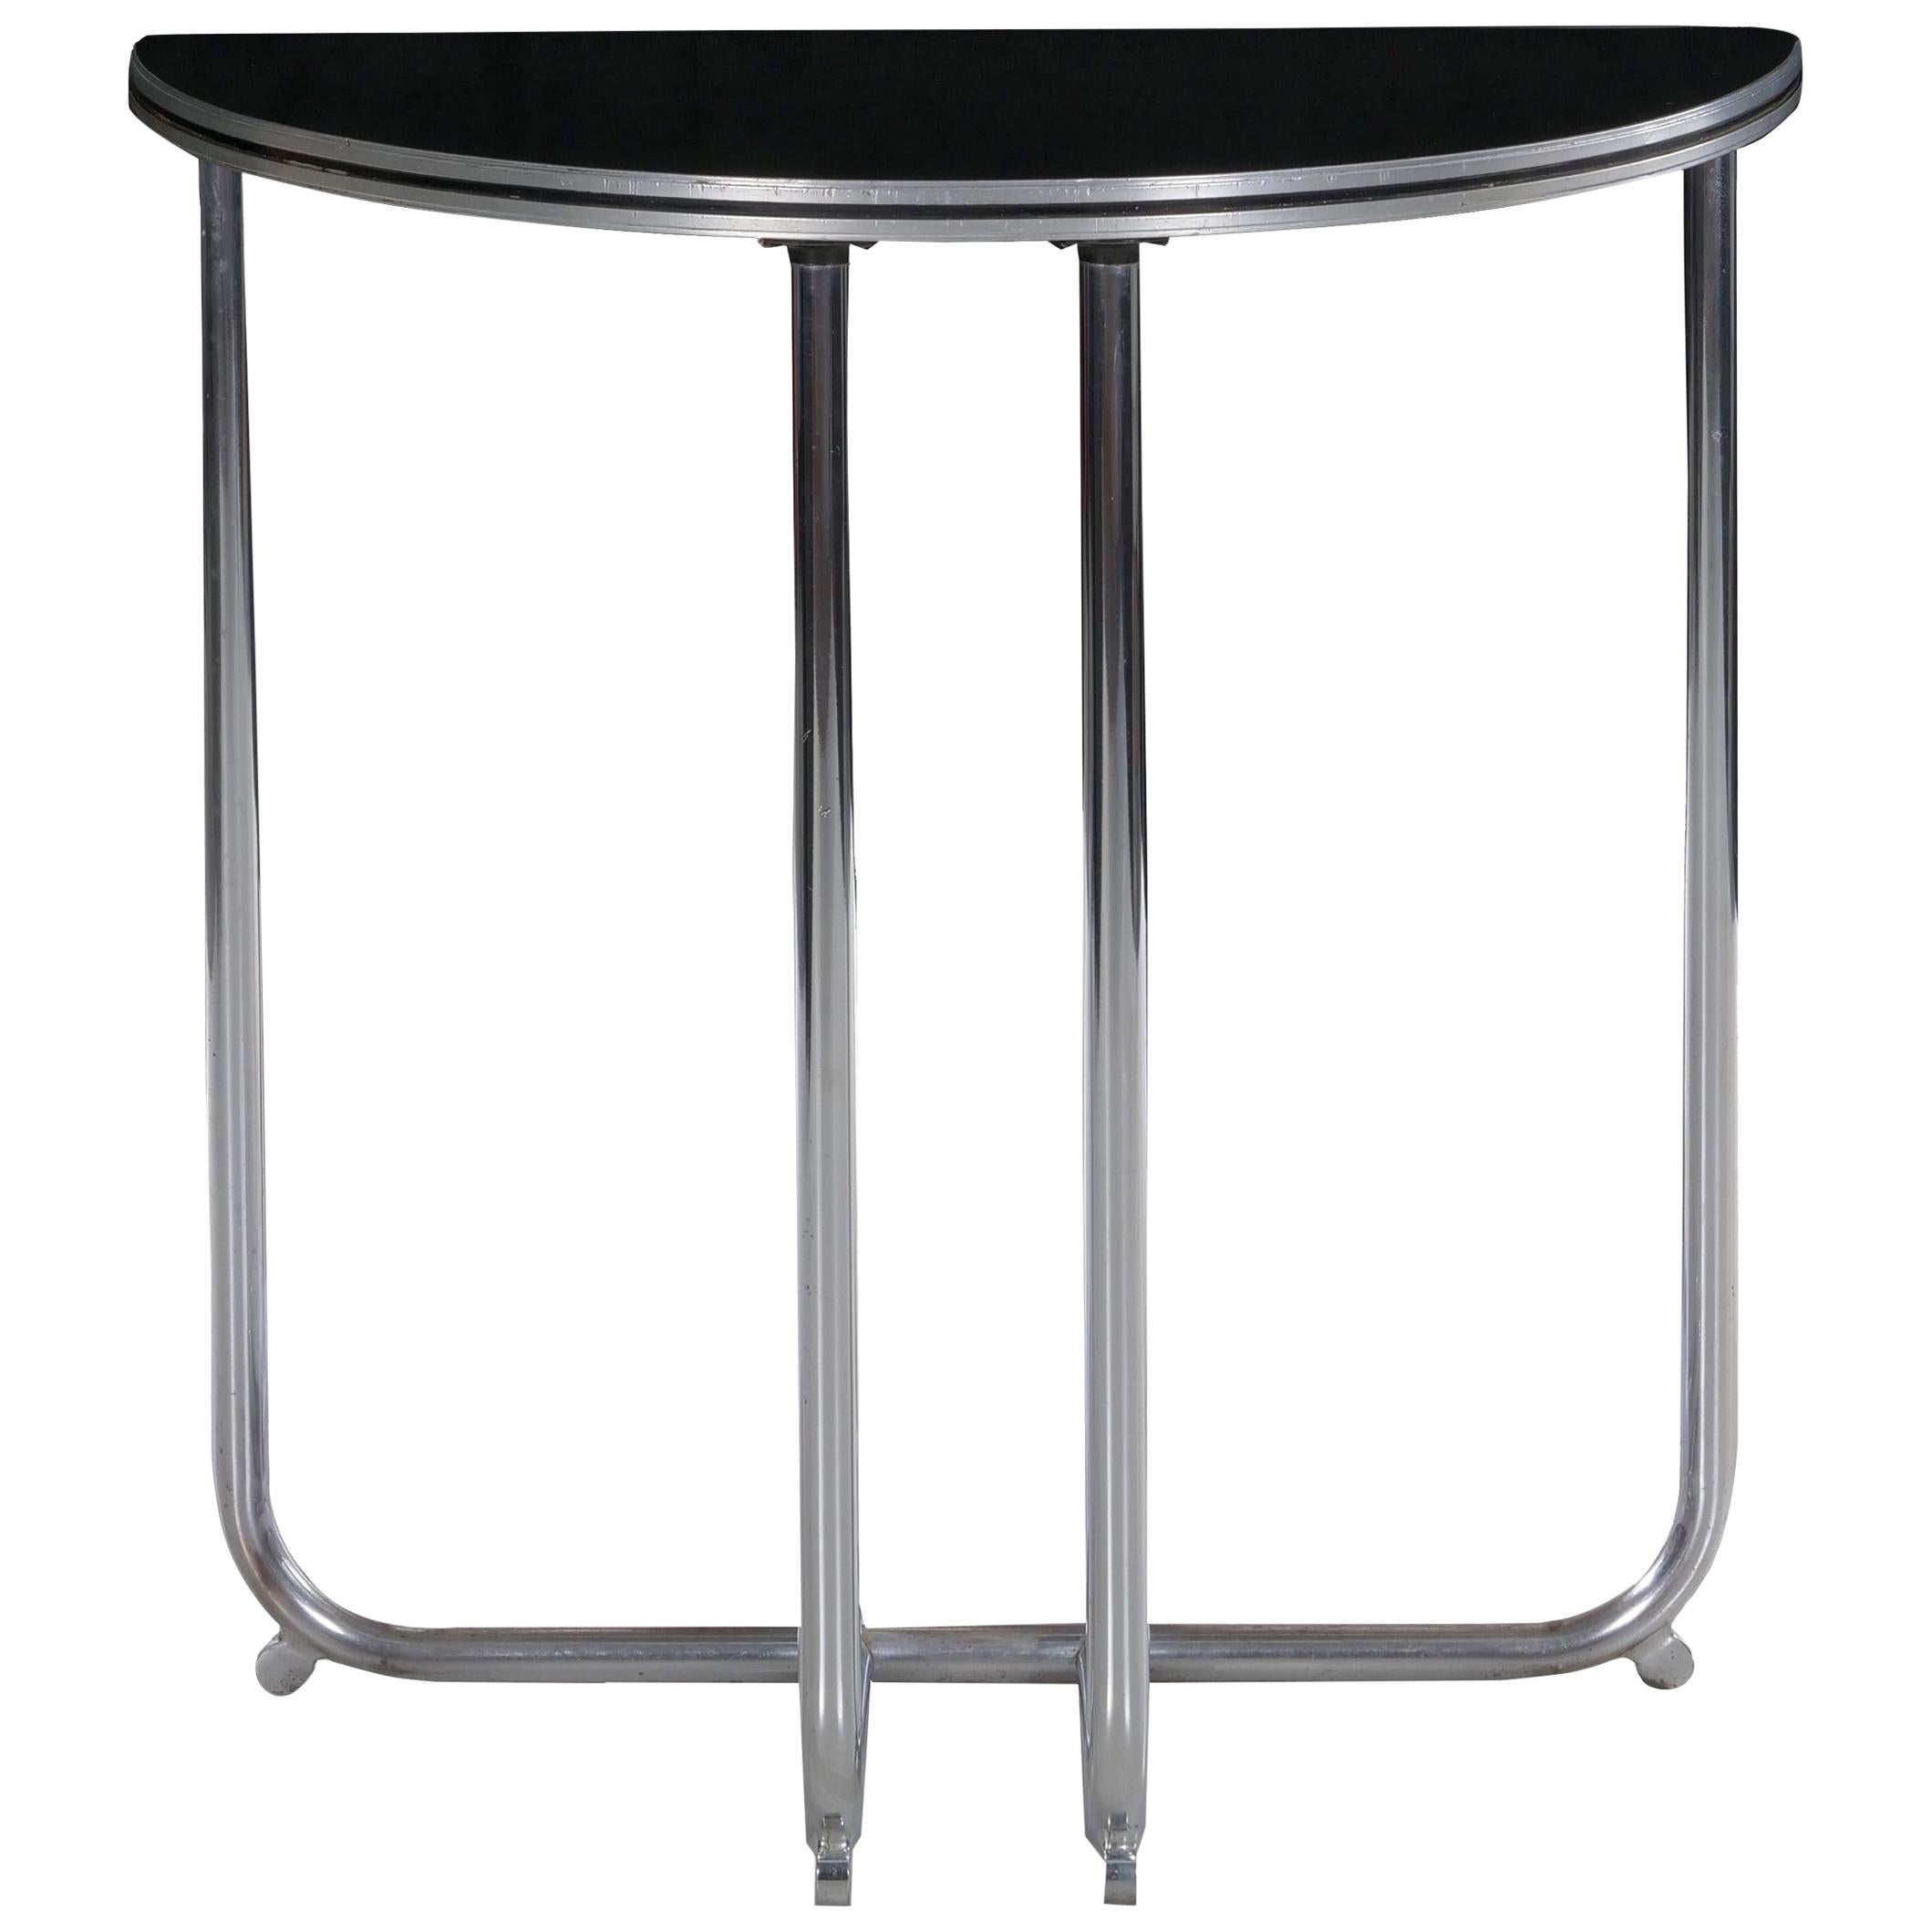 Art Deco Chrome and Black Lacquer Demilune Side Table by Royalchrome circa 1930s